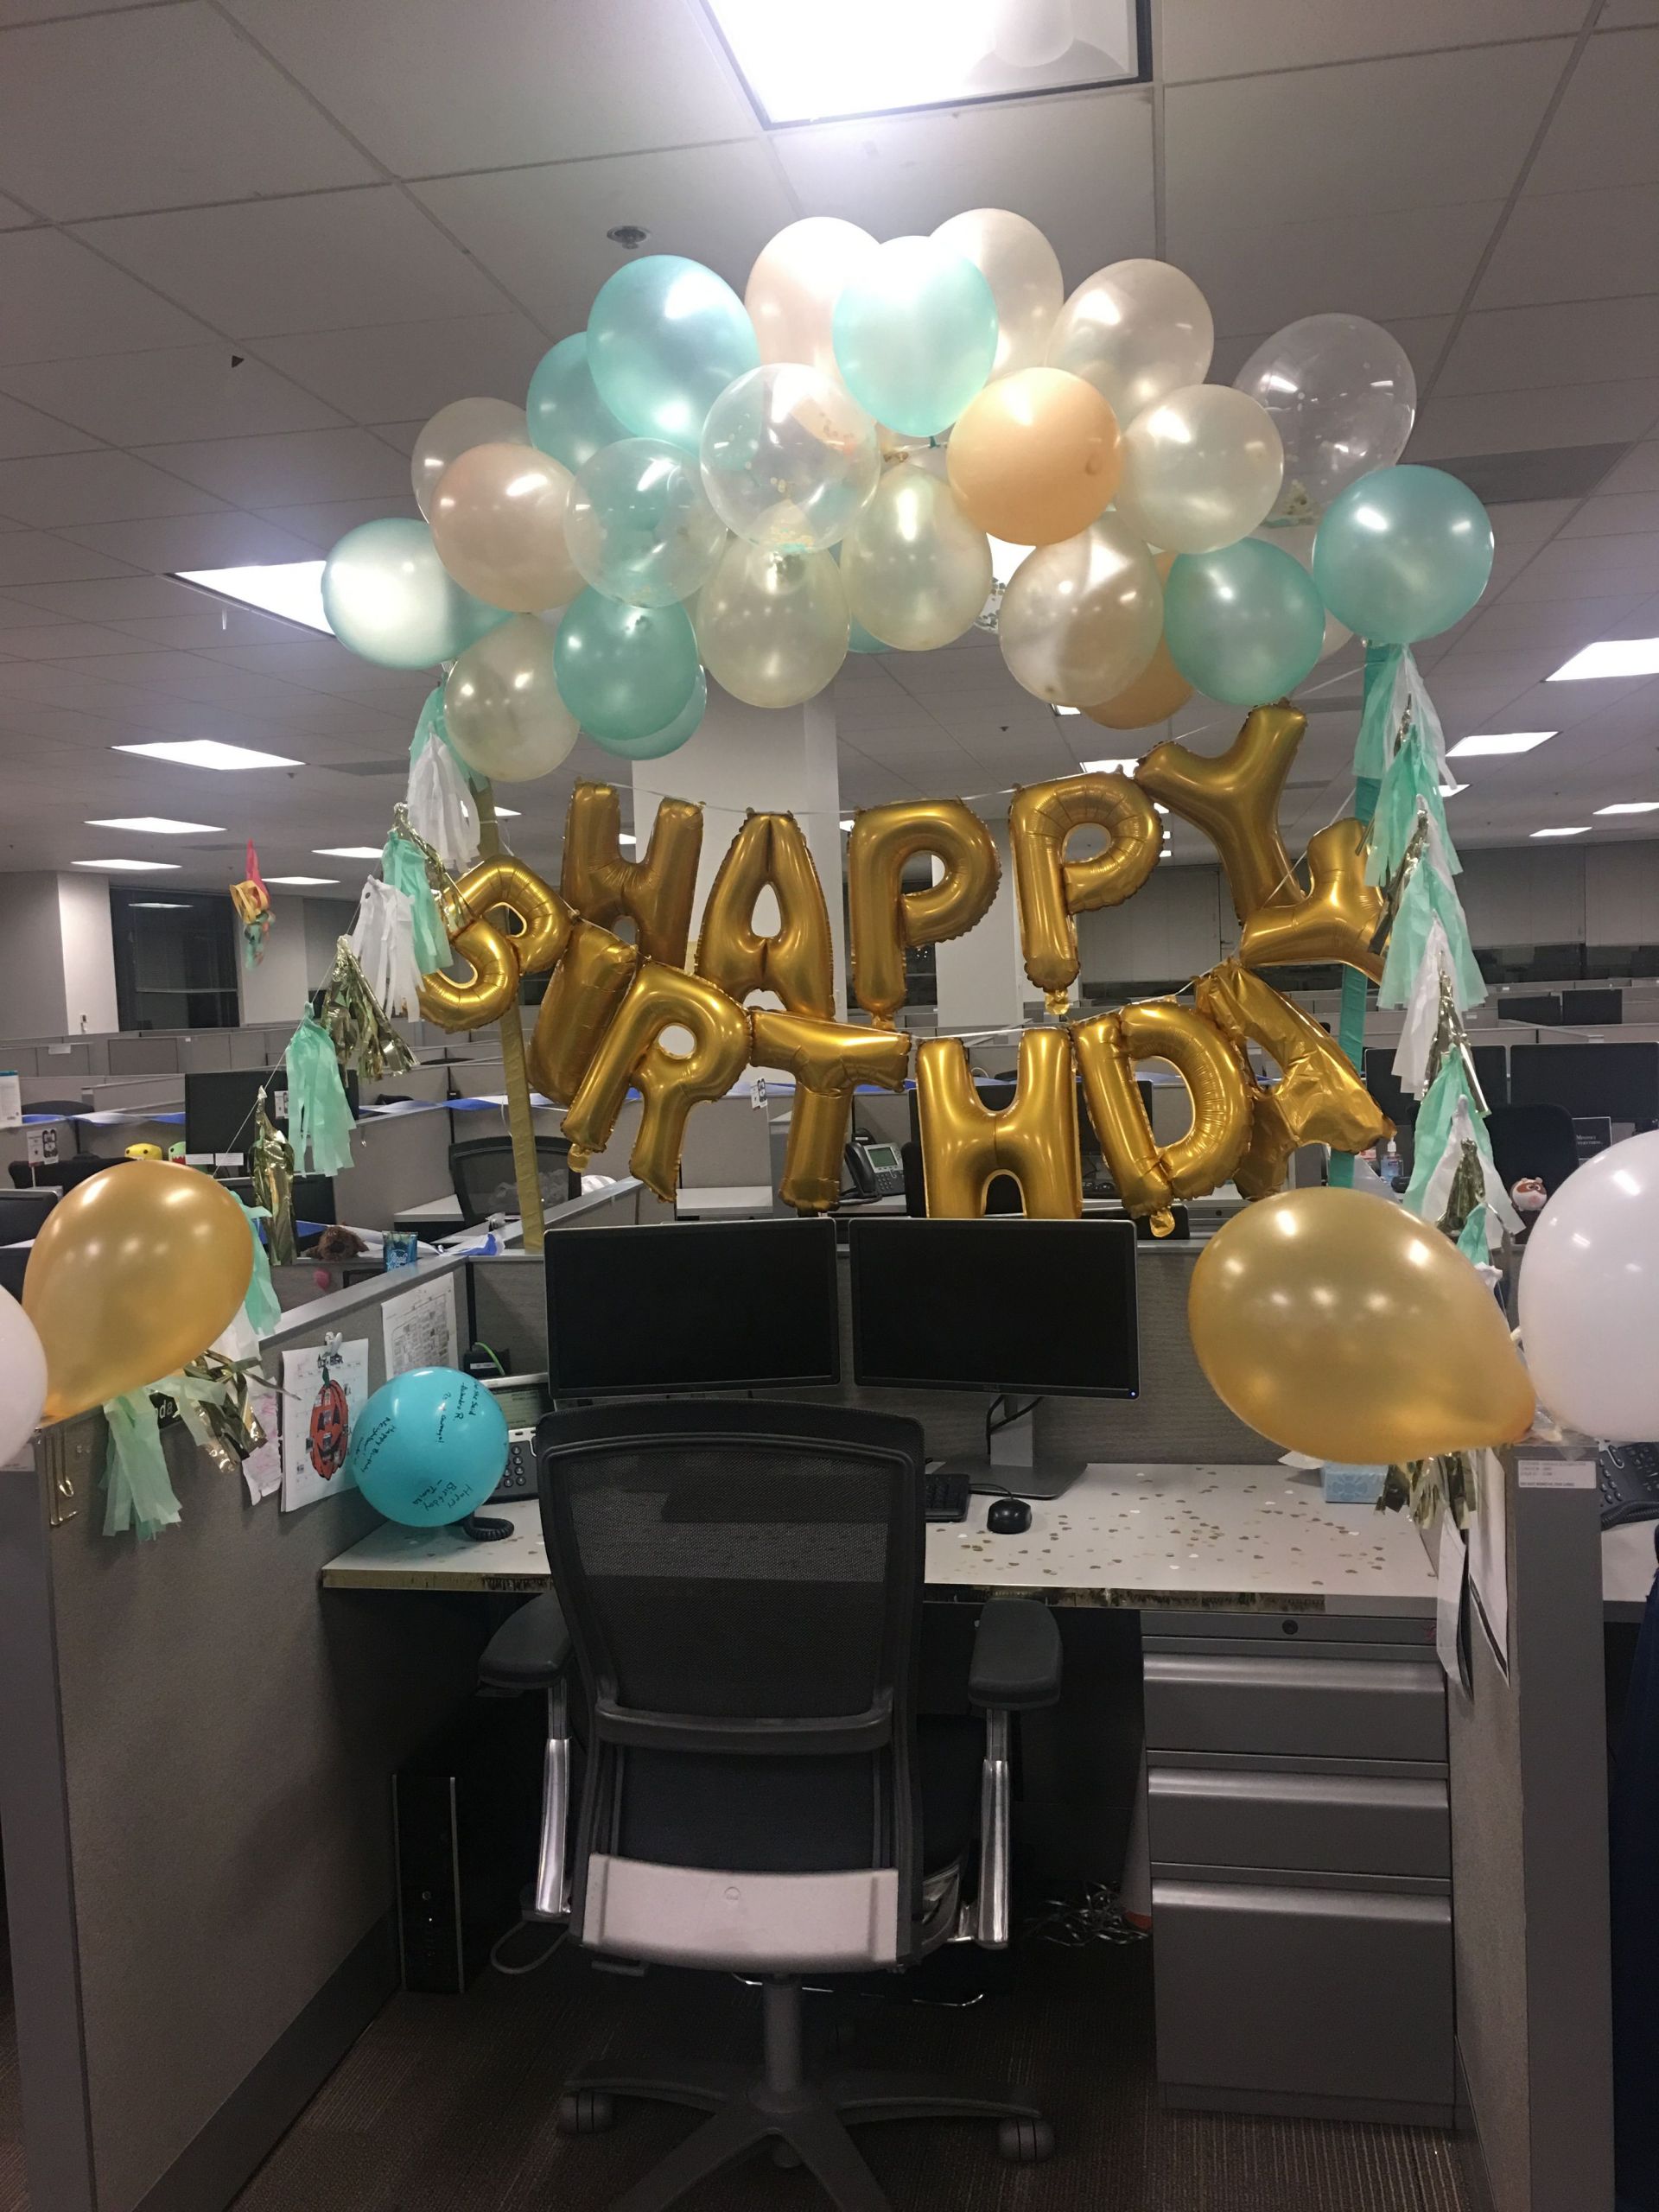 Cubicle Birthday Decorations
 Mint green and gold desk birthday decorations